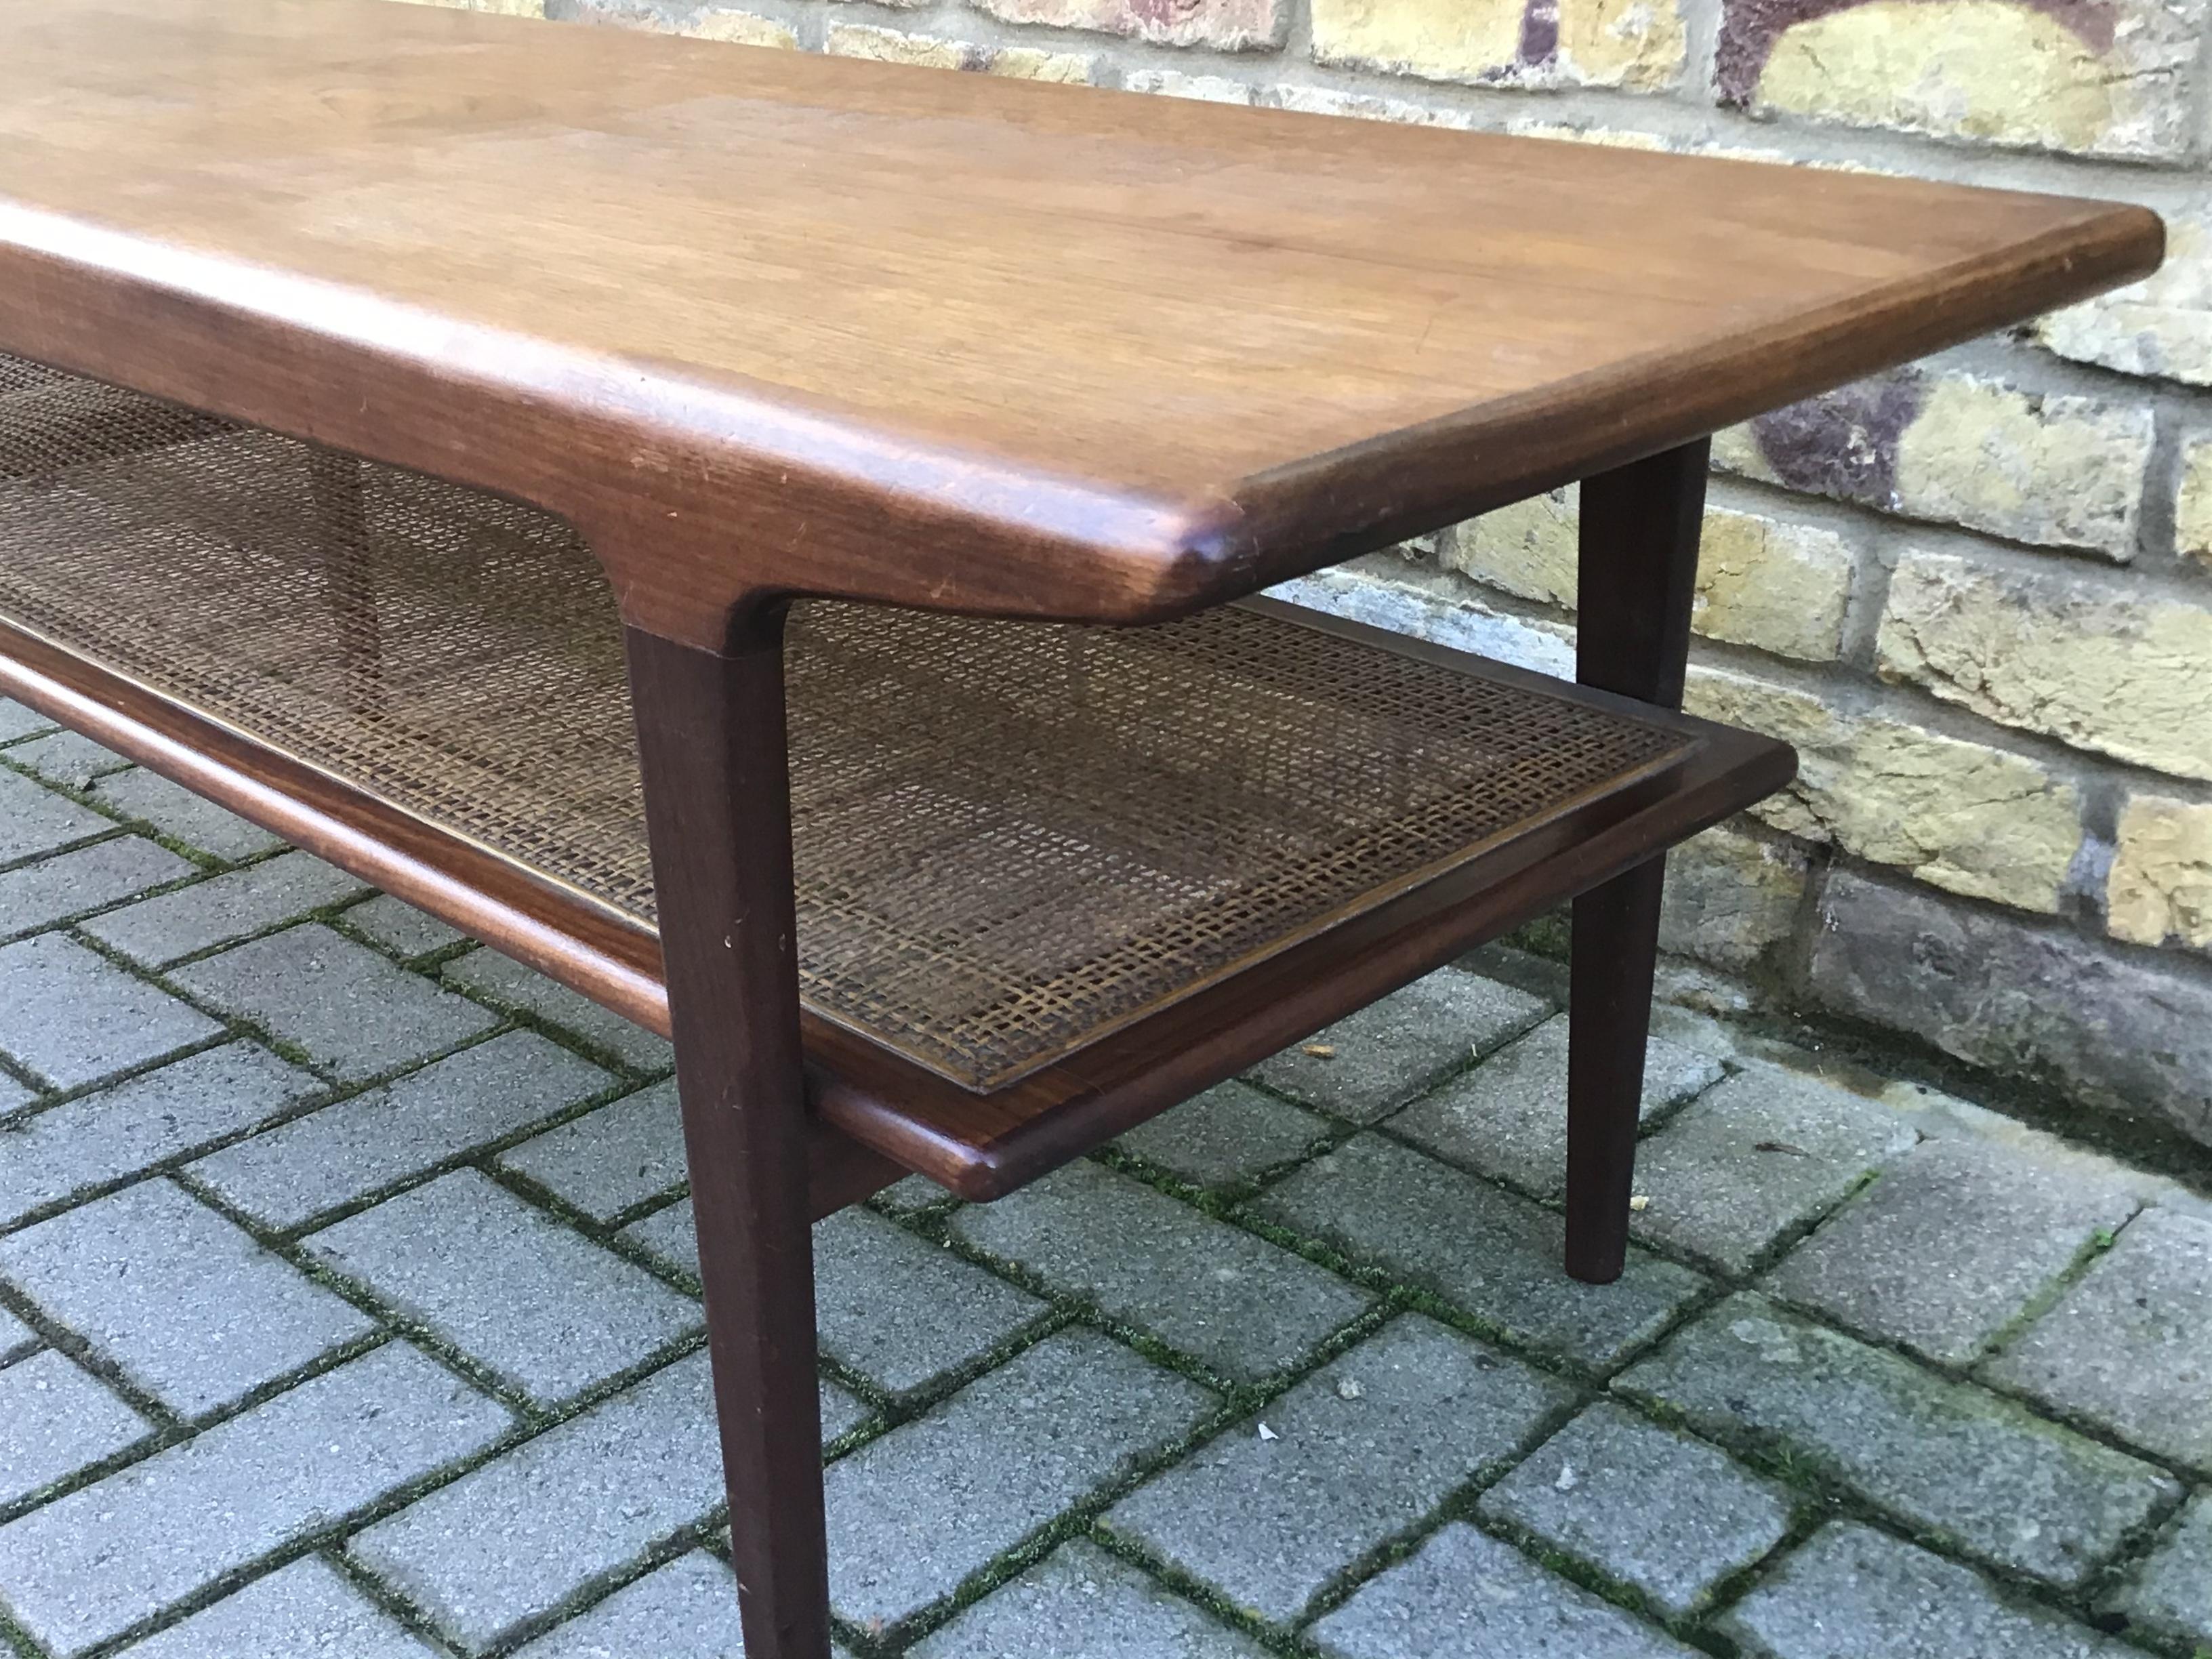 Well crafted teak coffee table with rattan shelving rounded edges
circa 1960s John Herbert.